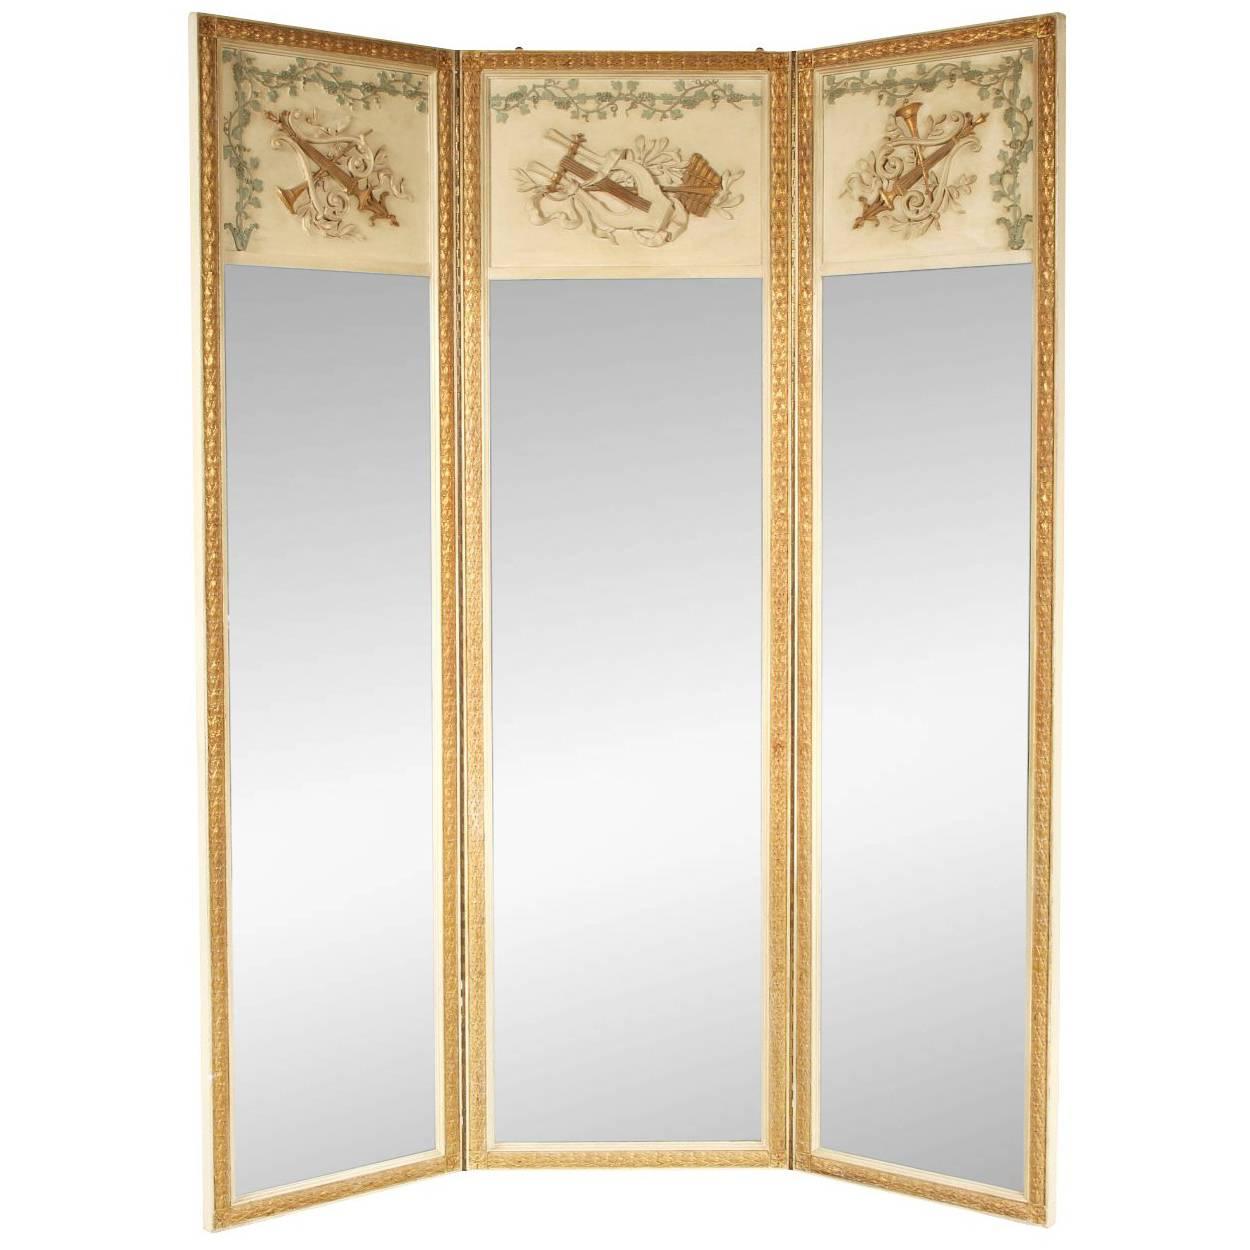 Neoclassical Three Part Mirror in Carved Wood and Gesso